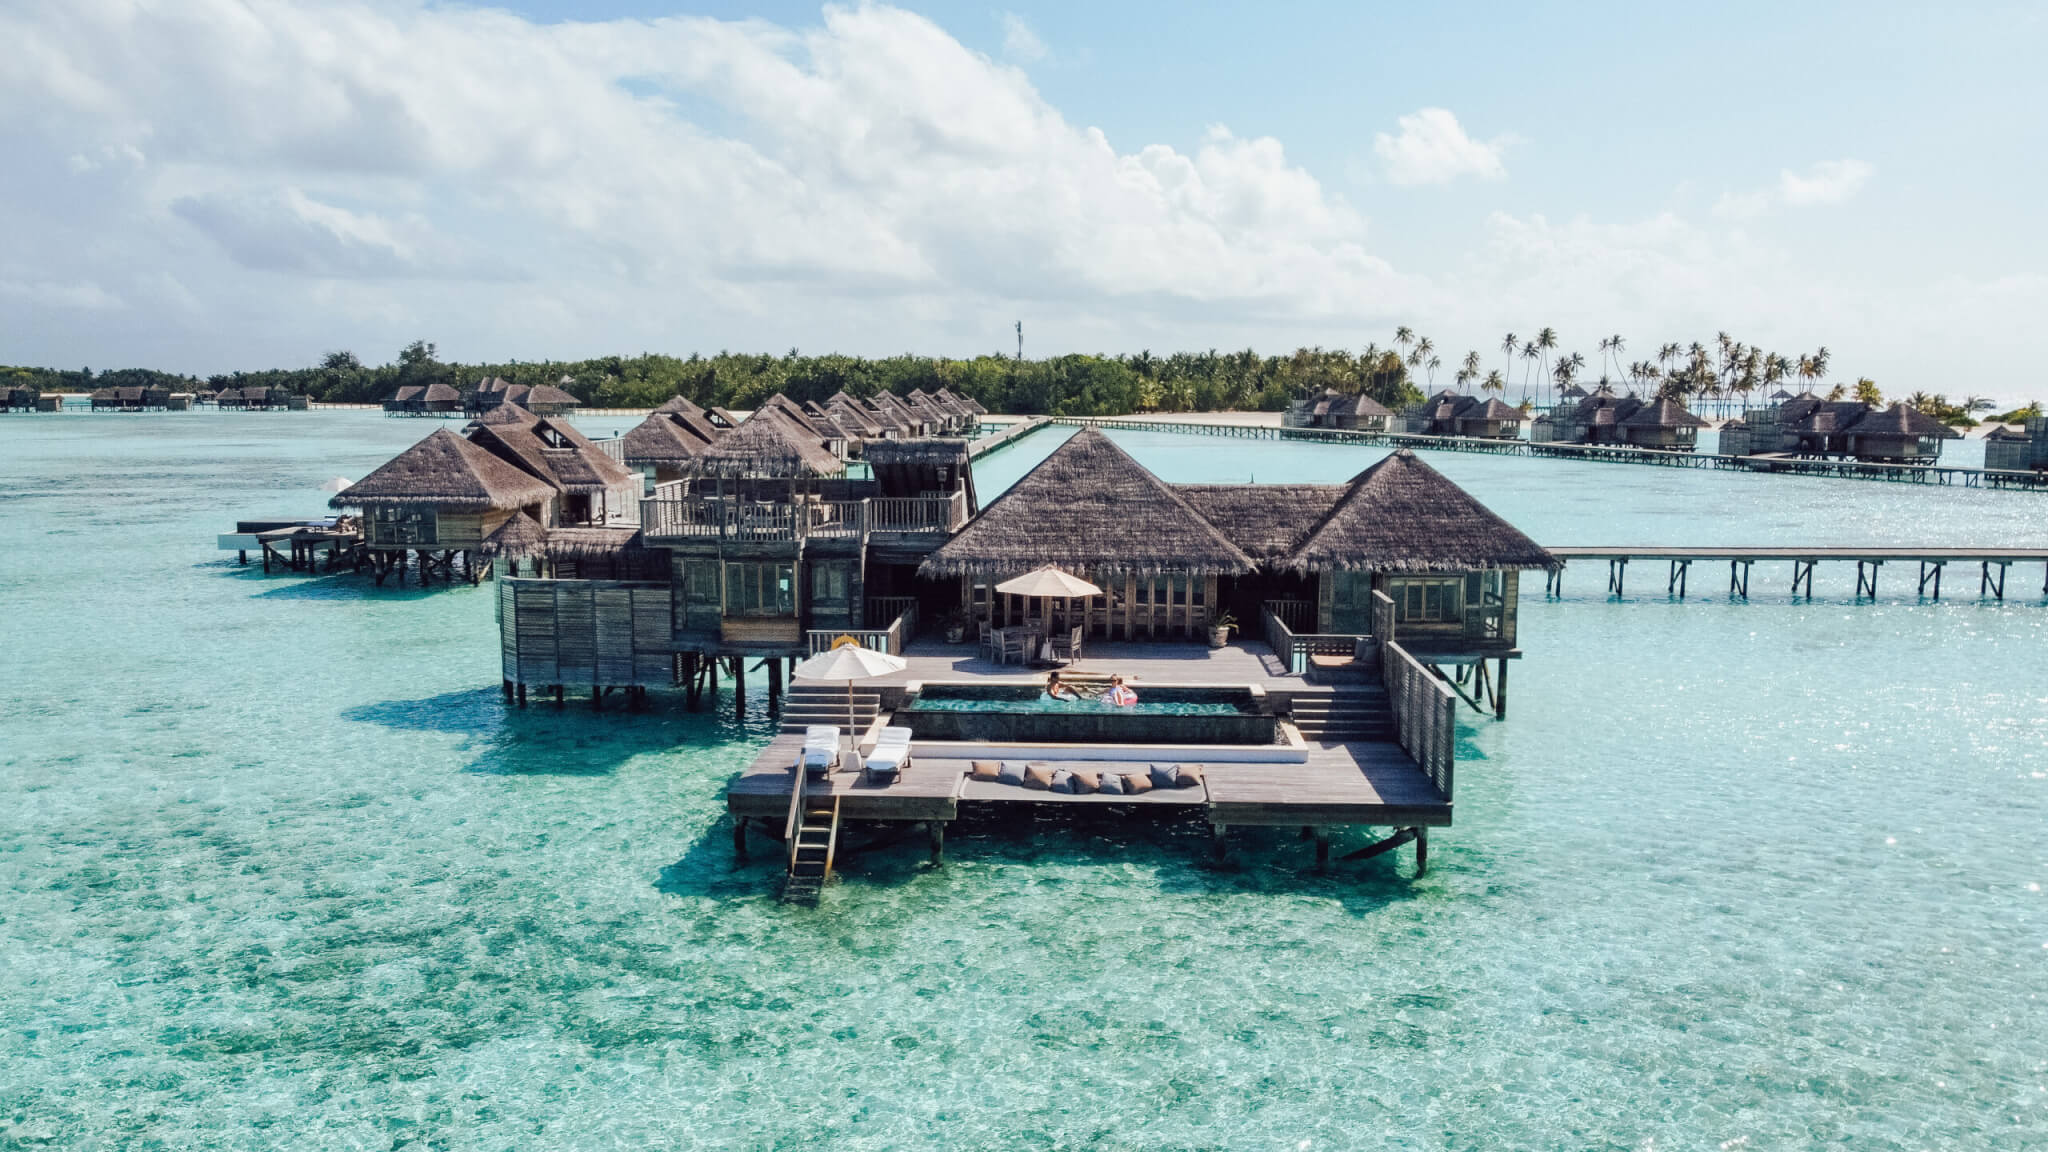 Mrs. Maldives: How this BOLI lived a dream in secluded resorts